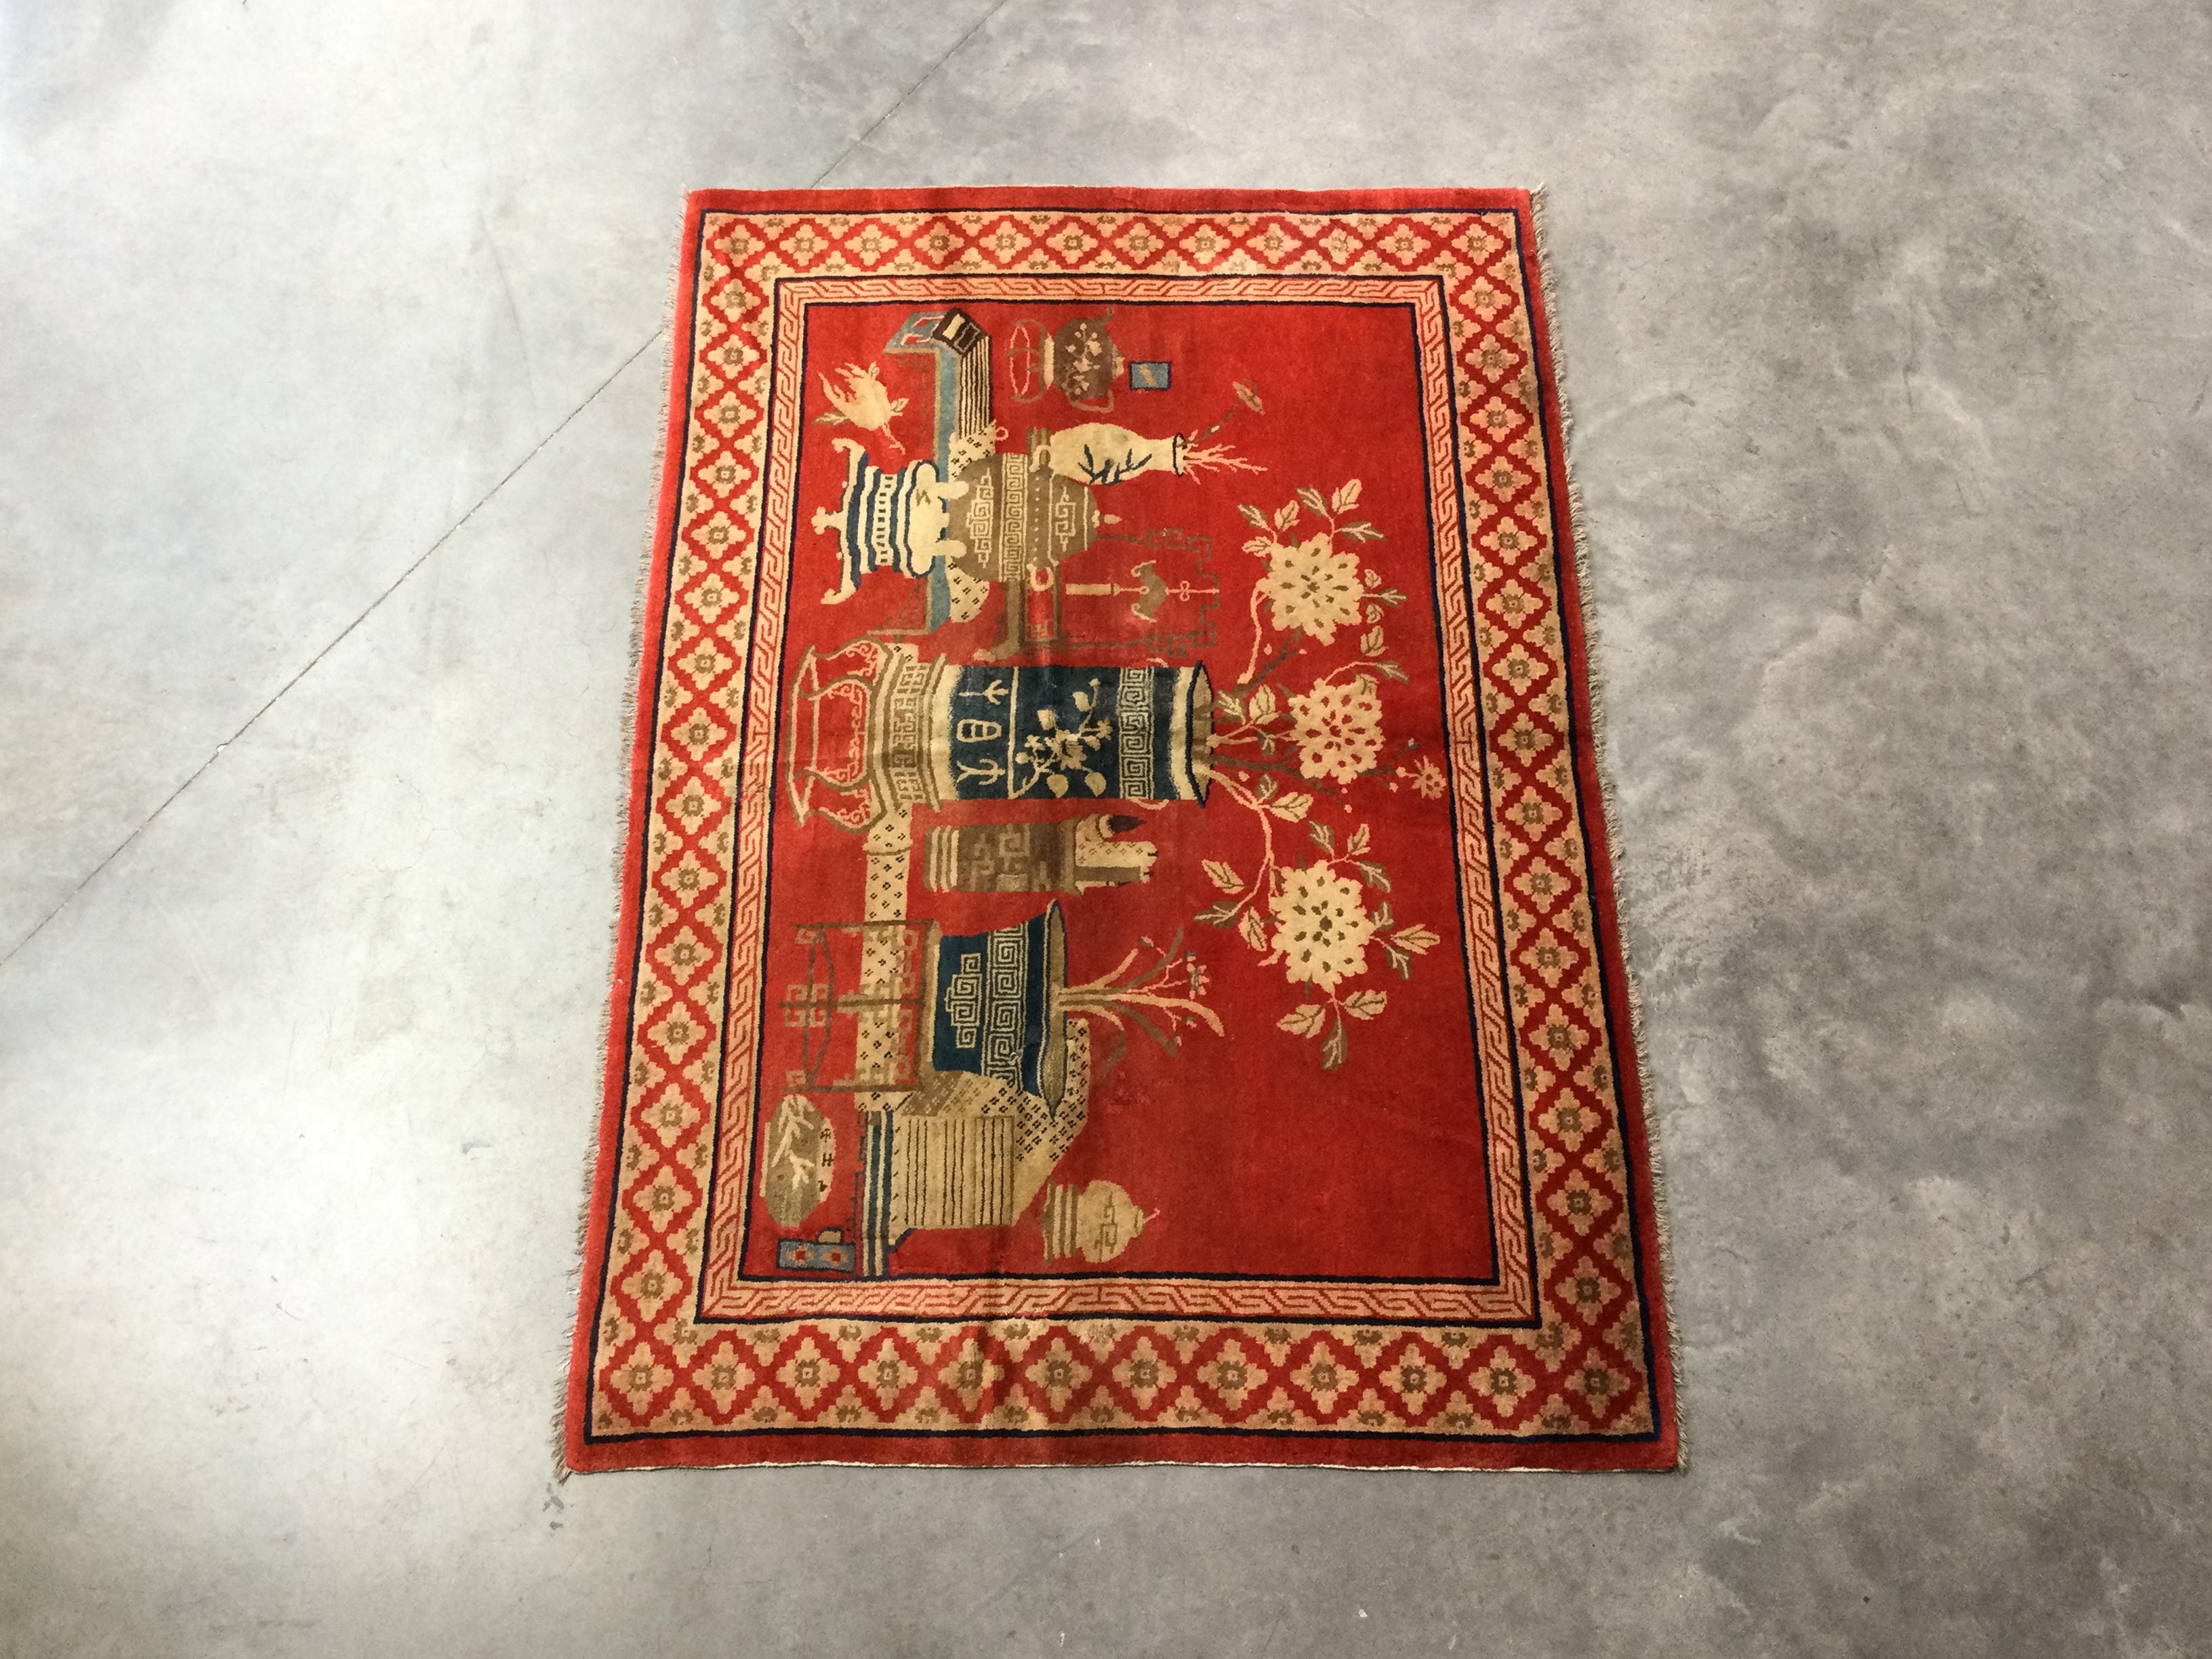 Antique Mongolian rug from around of 1920
- Wool designs that provide a feeling of constant softness when worn.
- Incorporates central design and all its edges. This makes it easy to focus perfectly on spaces.
- It provides luminosity and thanks to